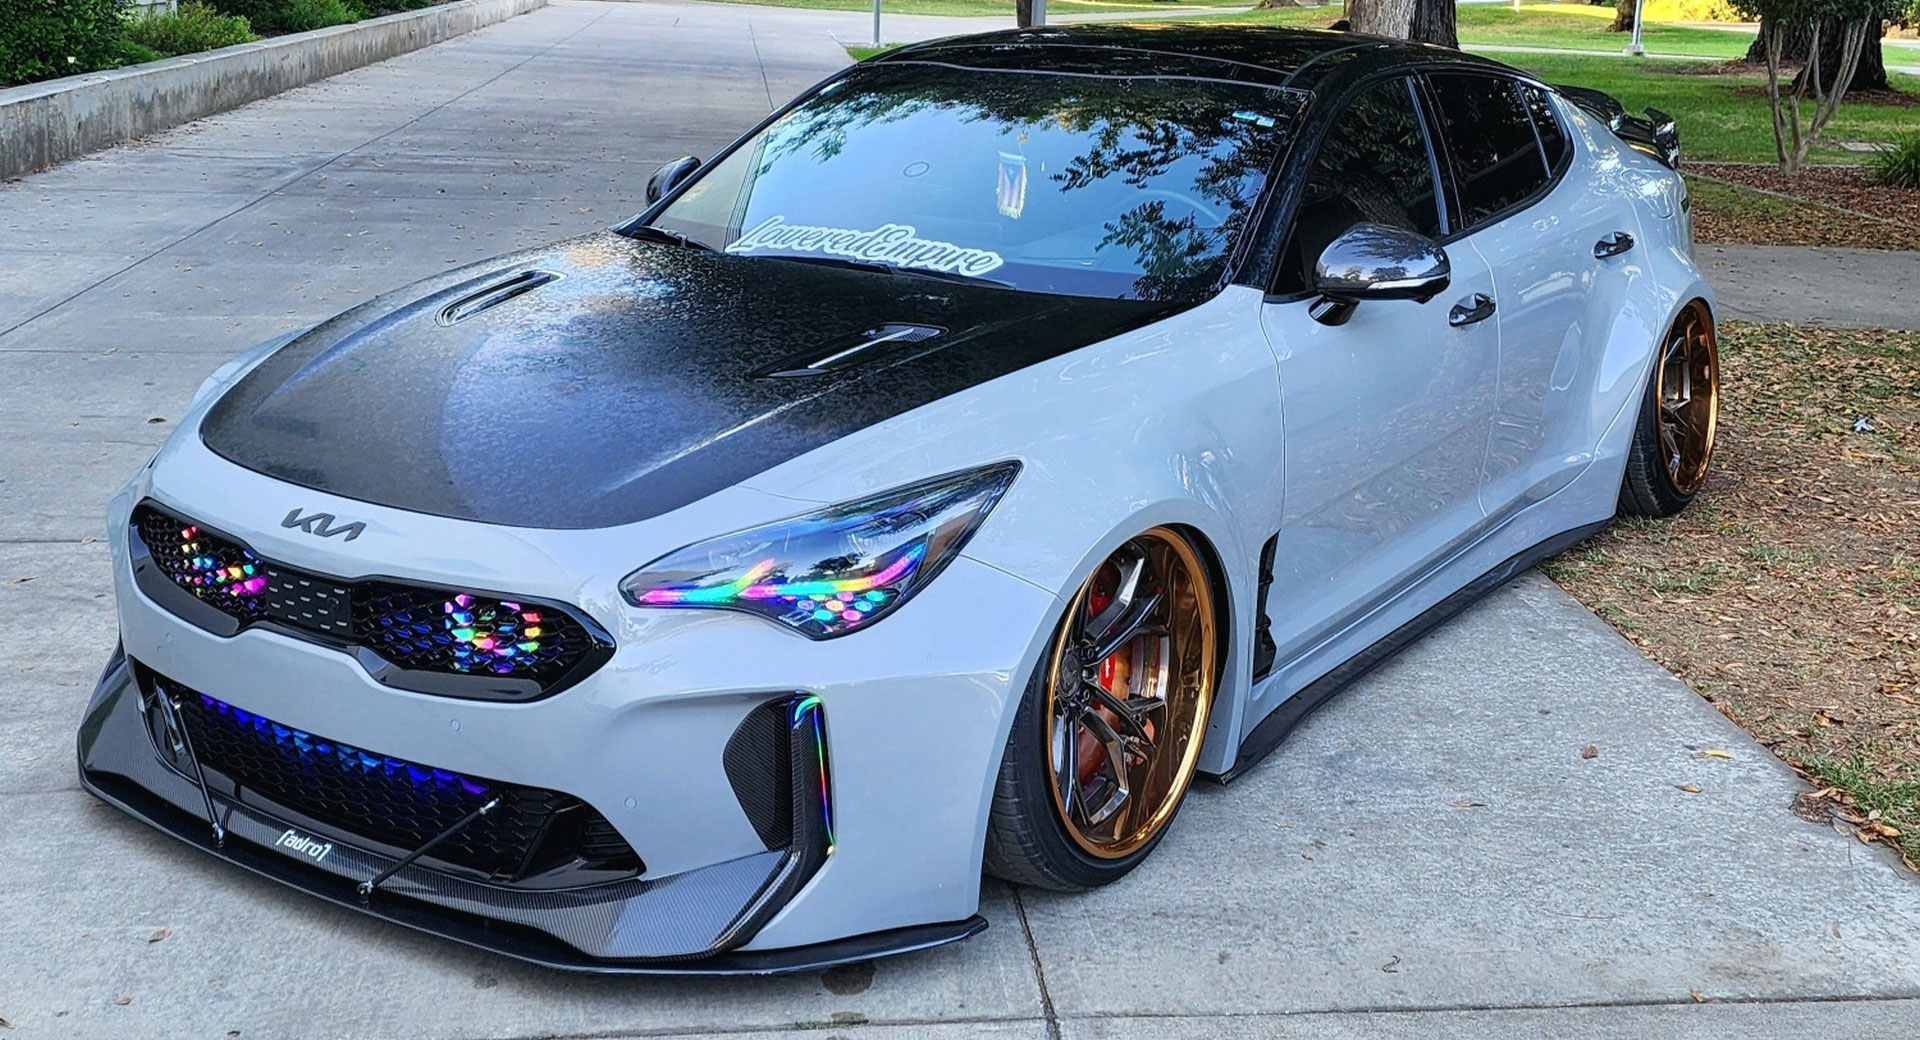 Are You A Fan Of This Widebody 2022 Kia Stinger Heading To SEMA?